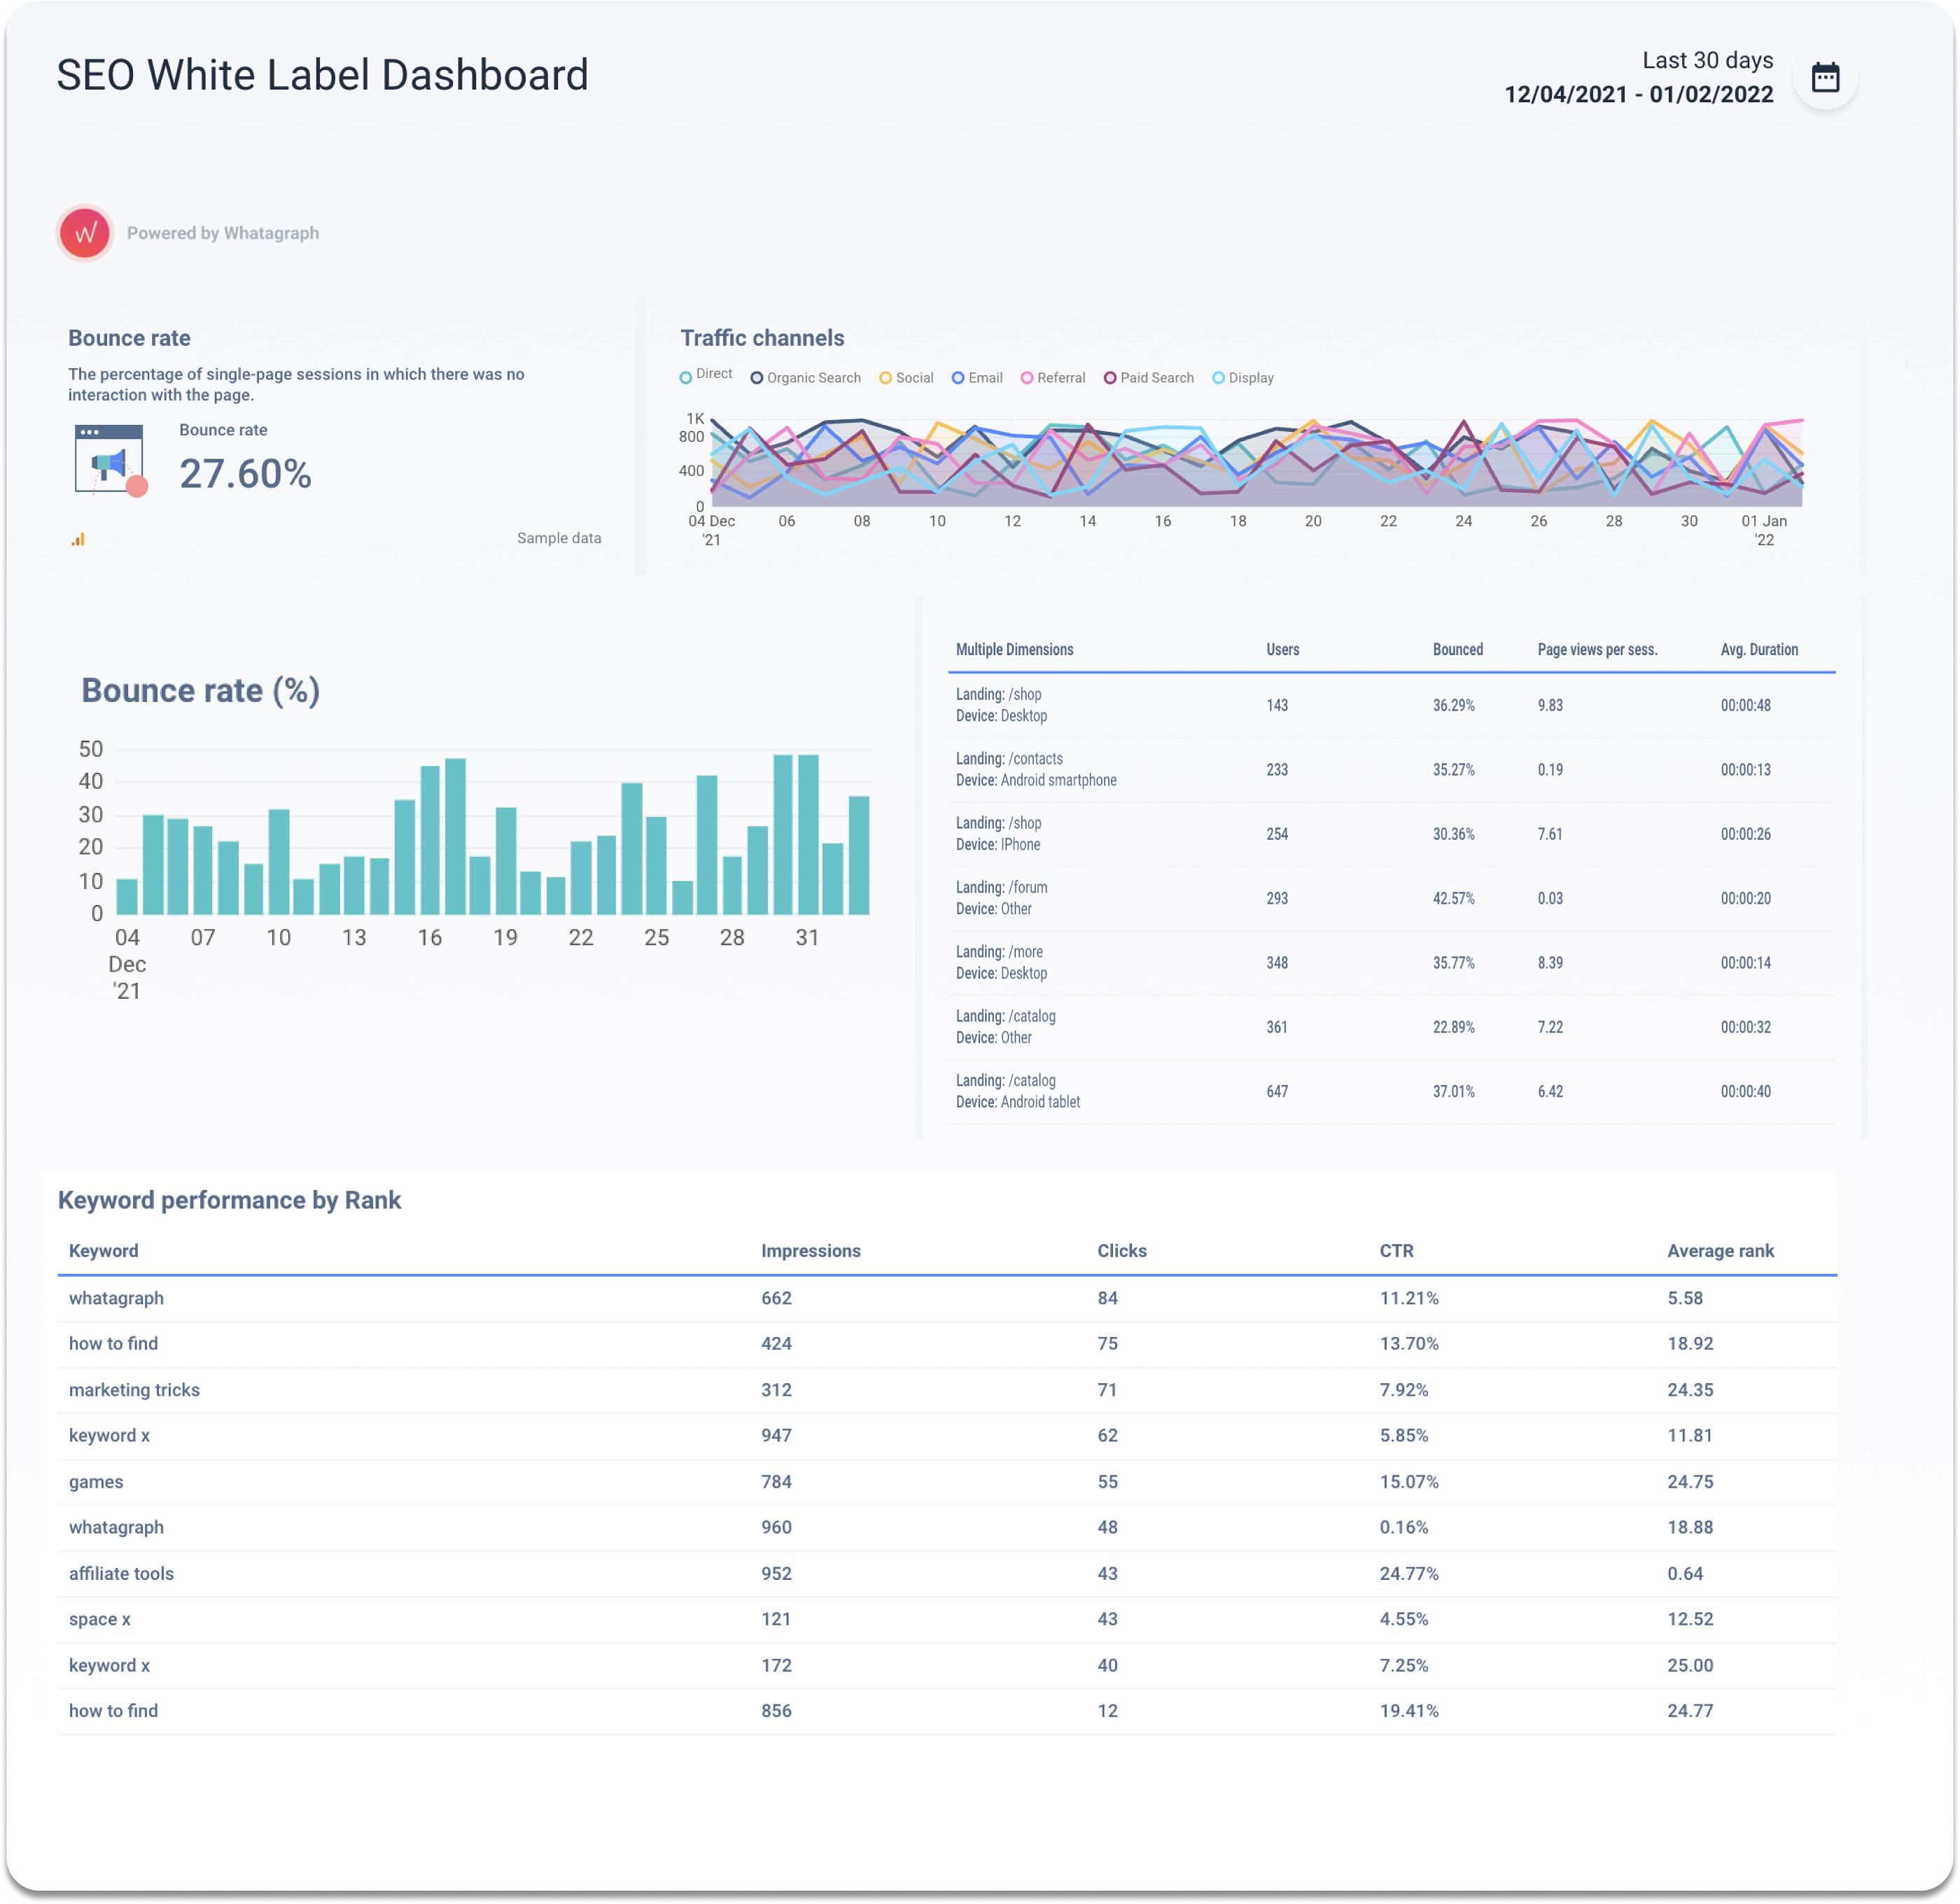 One of the most popular SEO dashboards is the SEO White Label Dashboard. 